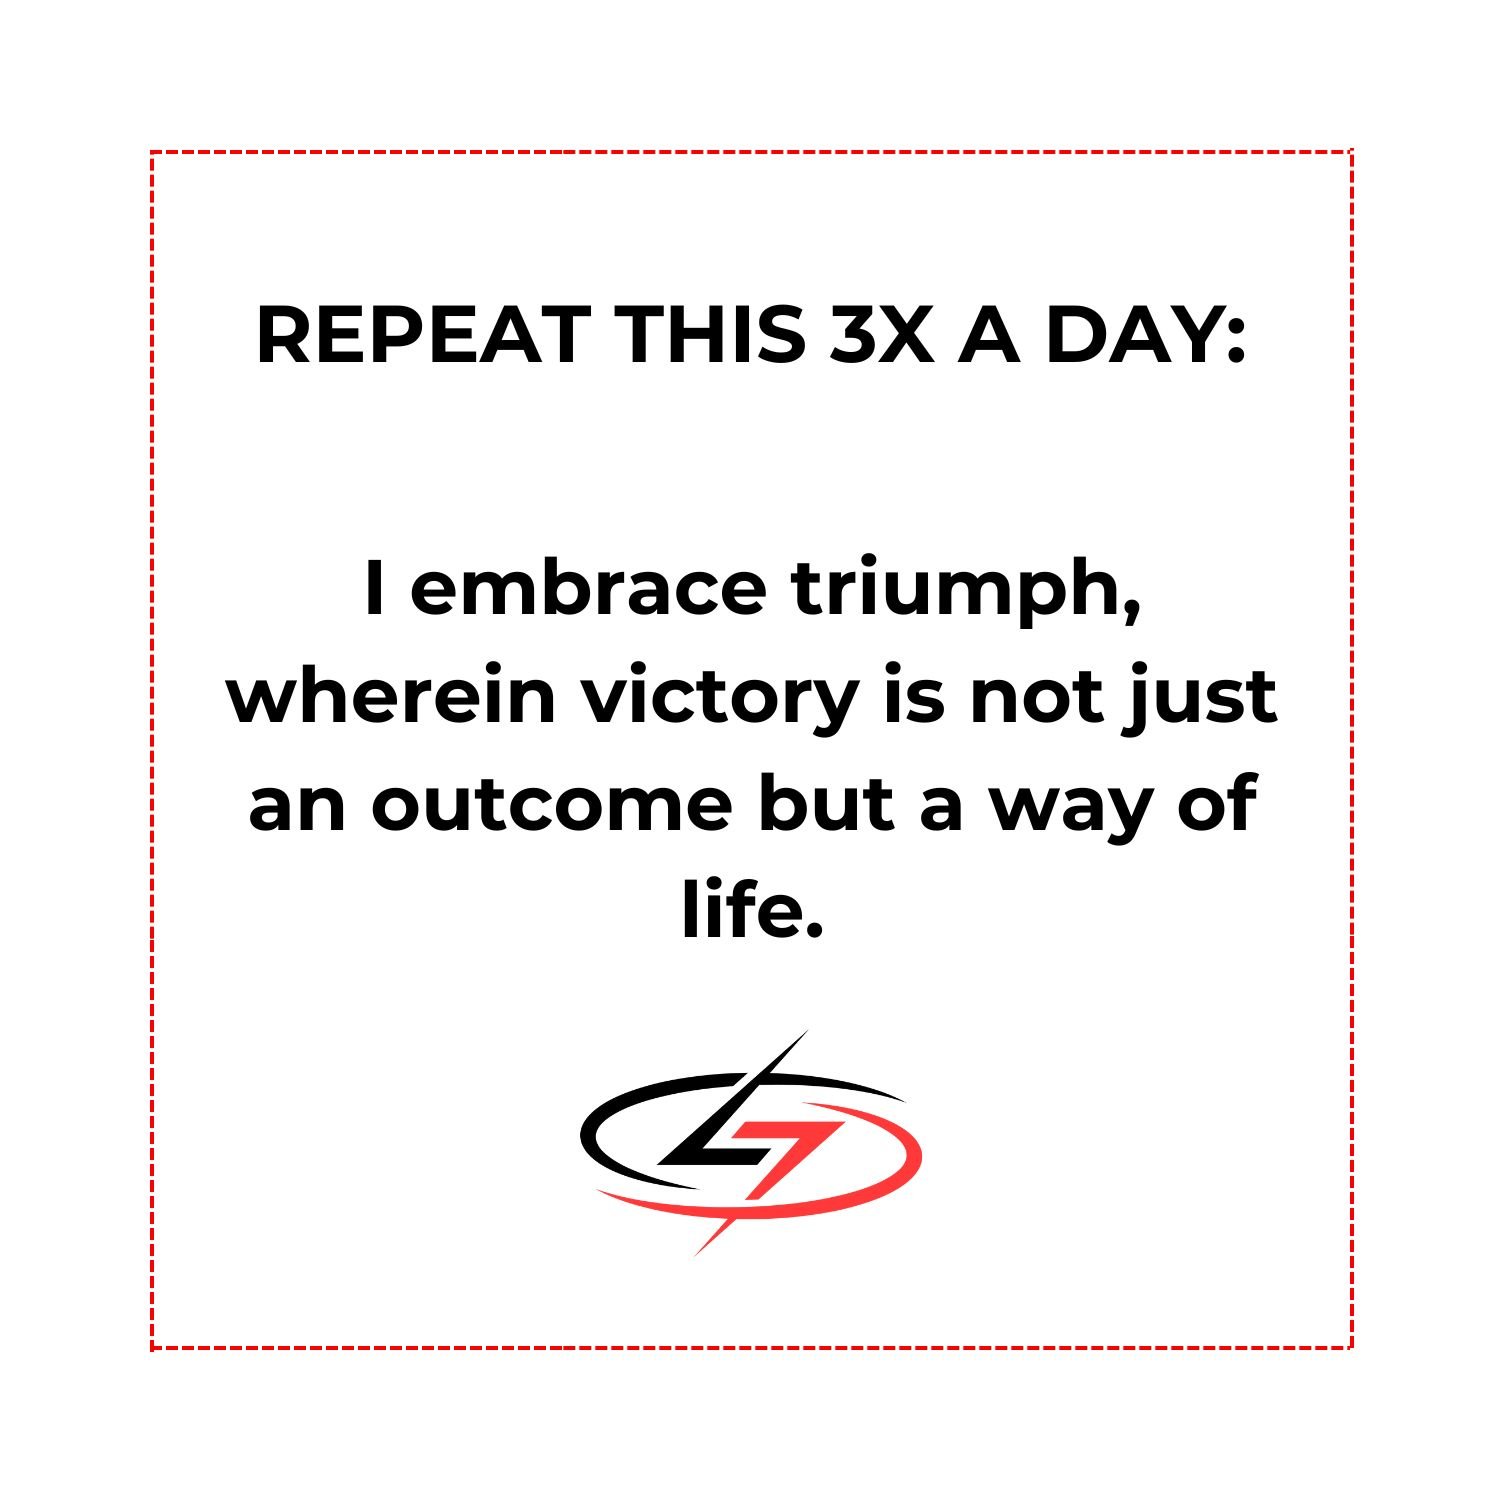 🏆 Repeat this three times a day: I embrace triumph wherein victory is not just an outcome but a way of life. This is the Thrillseeker's doctrine, so feed your brain this victorious memo for a victorious lifestyle. 🏁🏁 #ThrillEnergy #ElevateYourMind